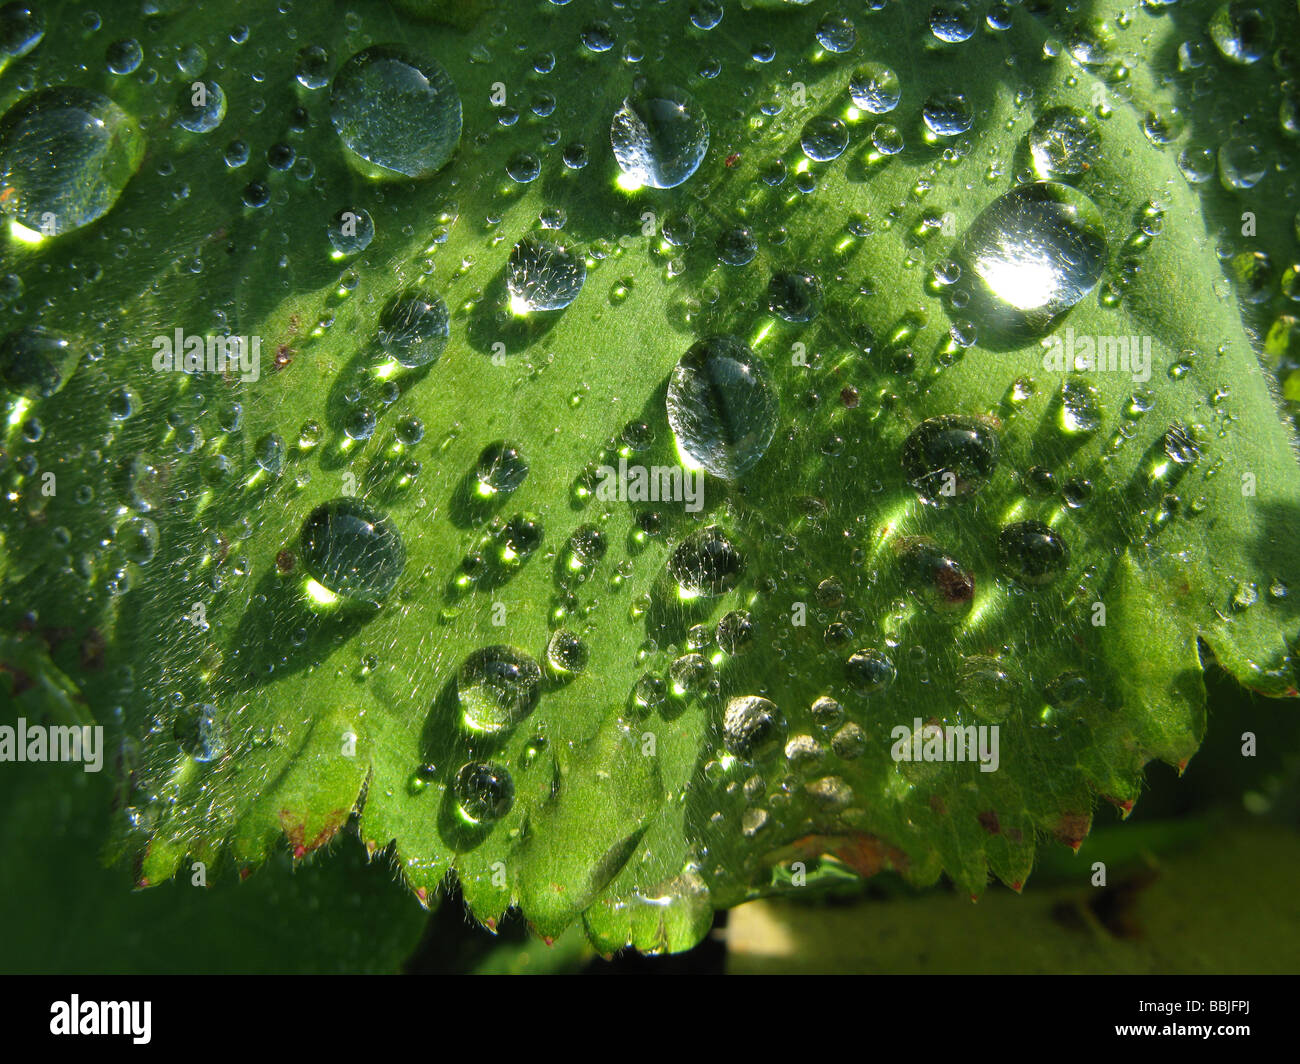 Water droplets on leaves of Alchemilla mollis plant, better known as Garden Lady's Mantle Stock Photo